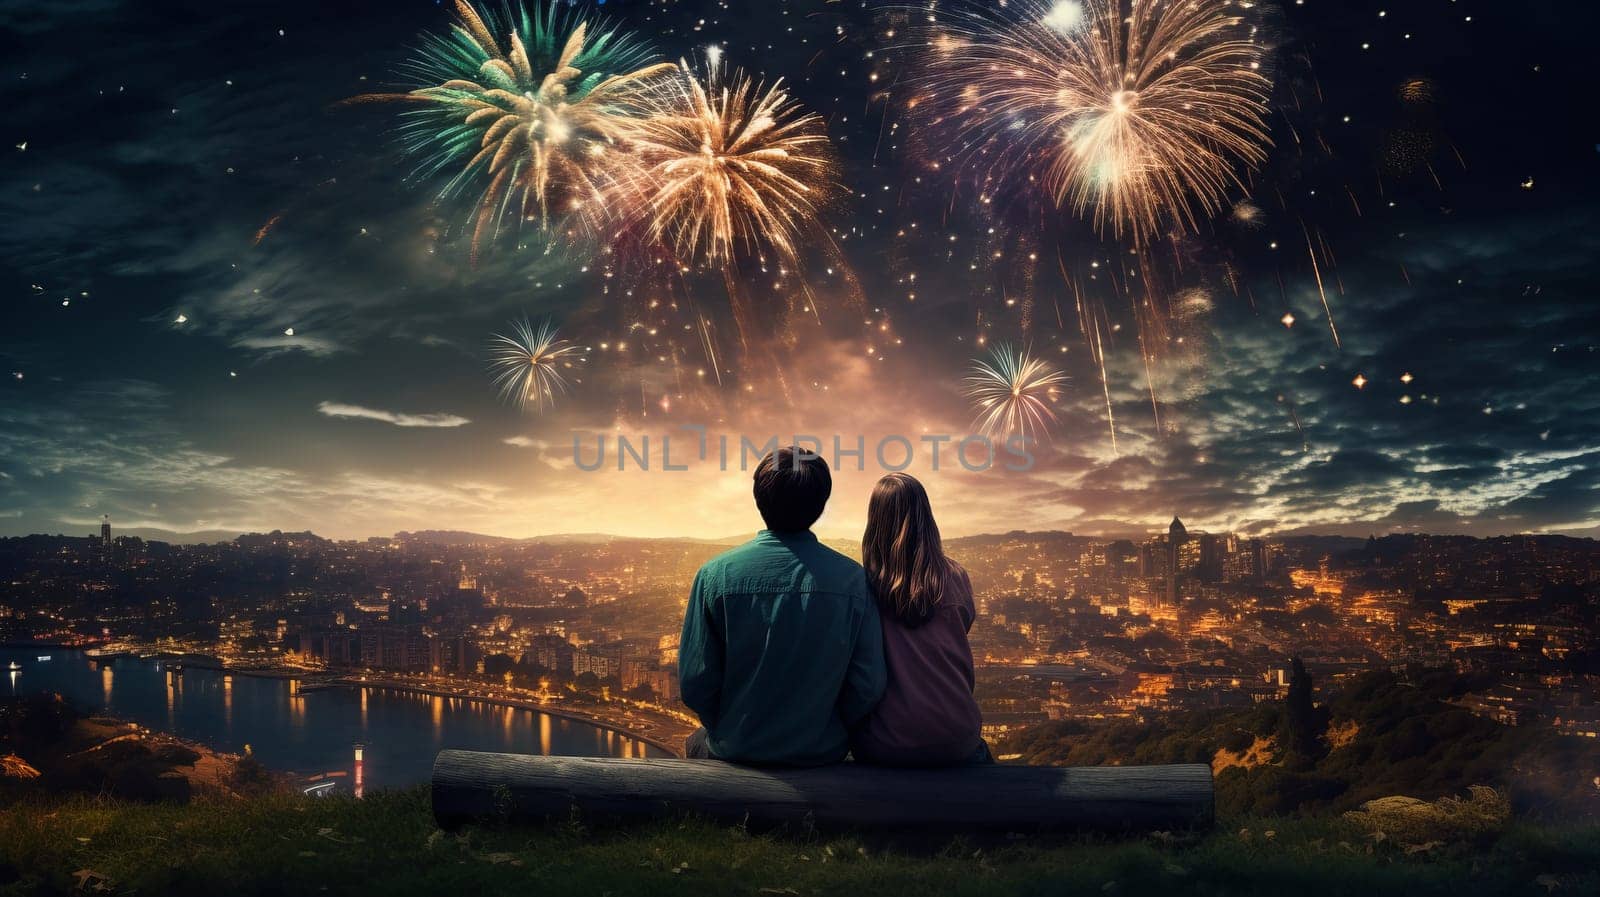 A couple enjoys a romantic and festive night on a bench, watching the colorful fireworks over the city skyline, celebrating Christmas and New Year. High quality photo